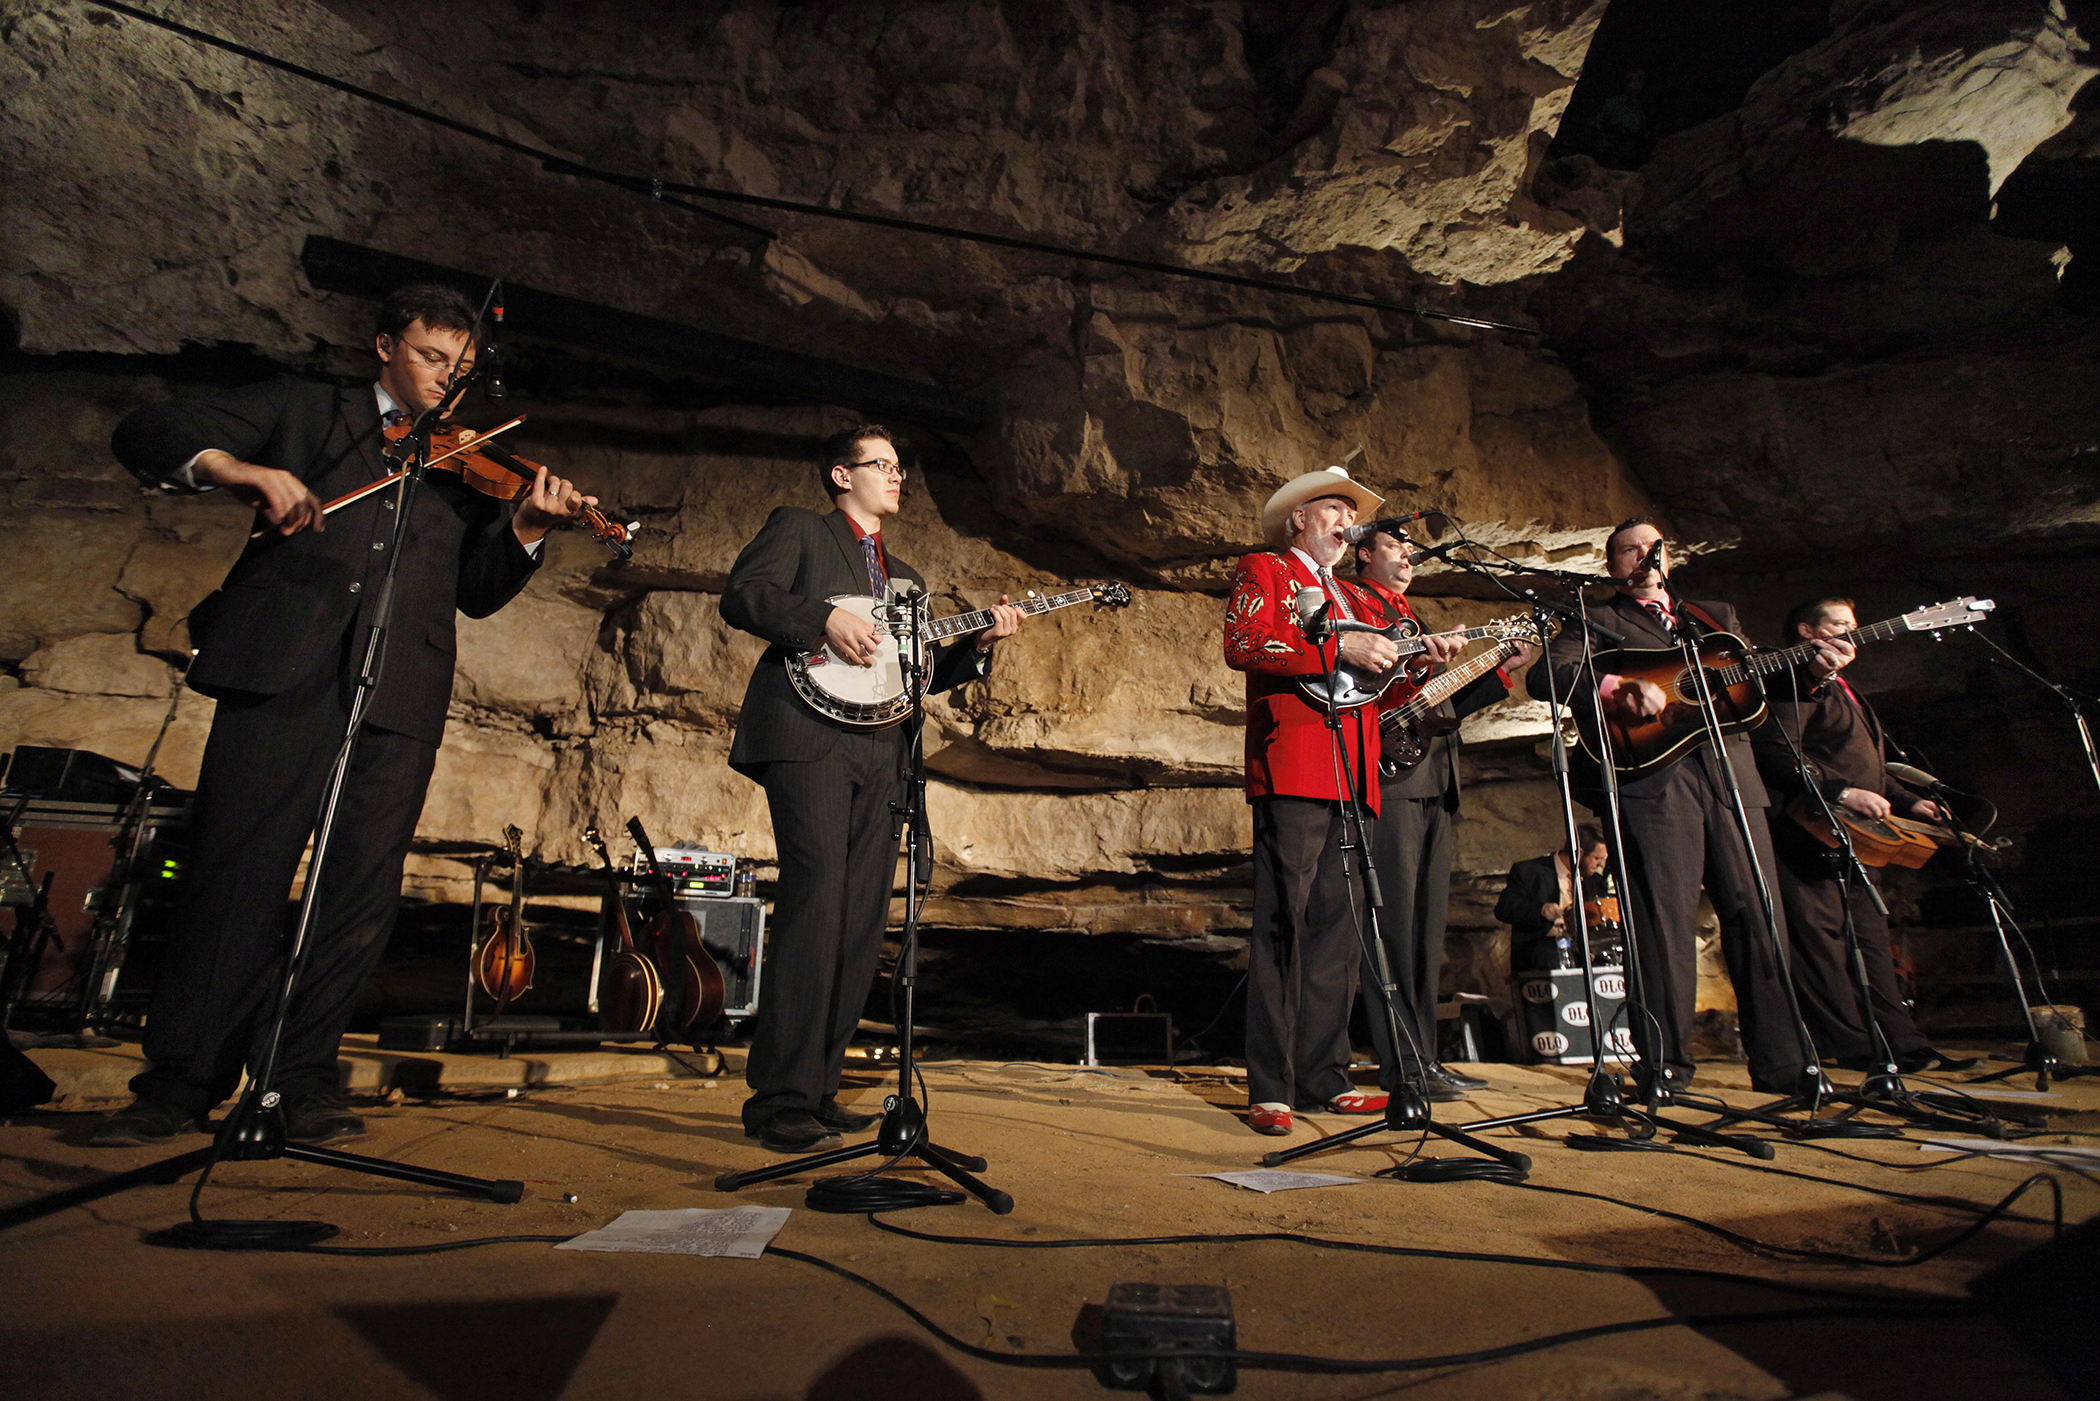 In this July 26, 2011 photo, Doyle Lawson, center, and Quicksilver perform in the Volcano Room at Cumberland Caverns, 333 feet below ground, in McMinnville, Tenn. The natural ampitheater is where the Bluegrass Underground radio show is broadcast from once a month.